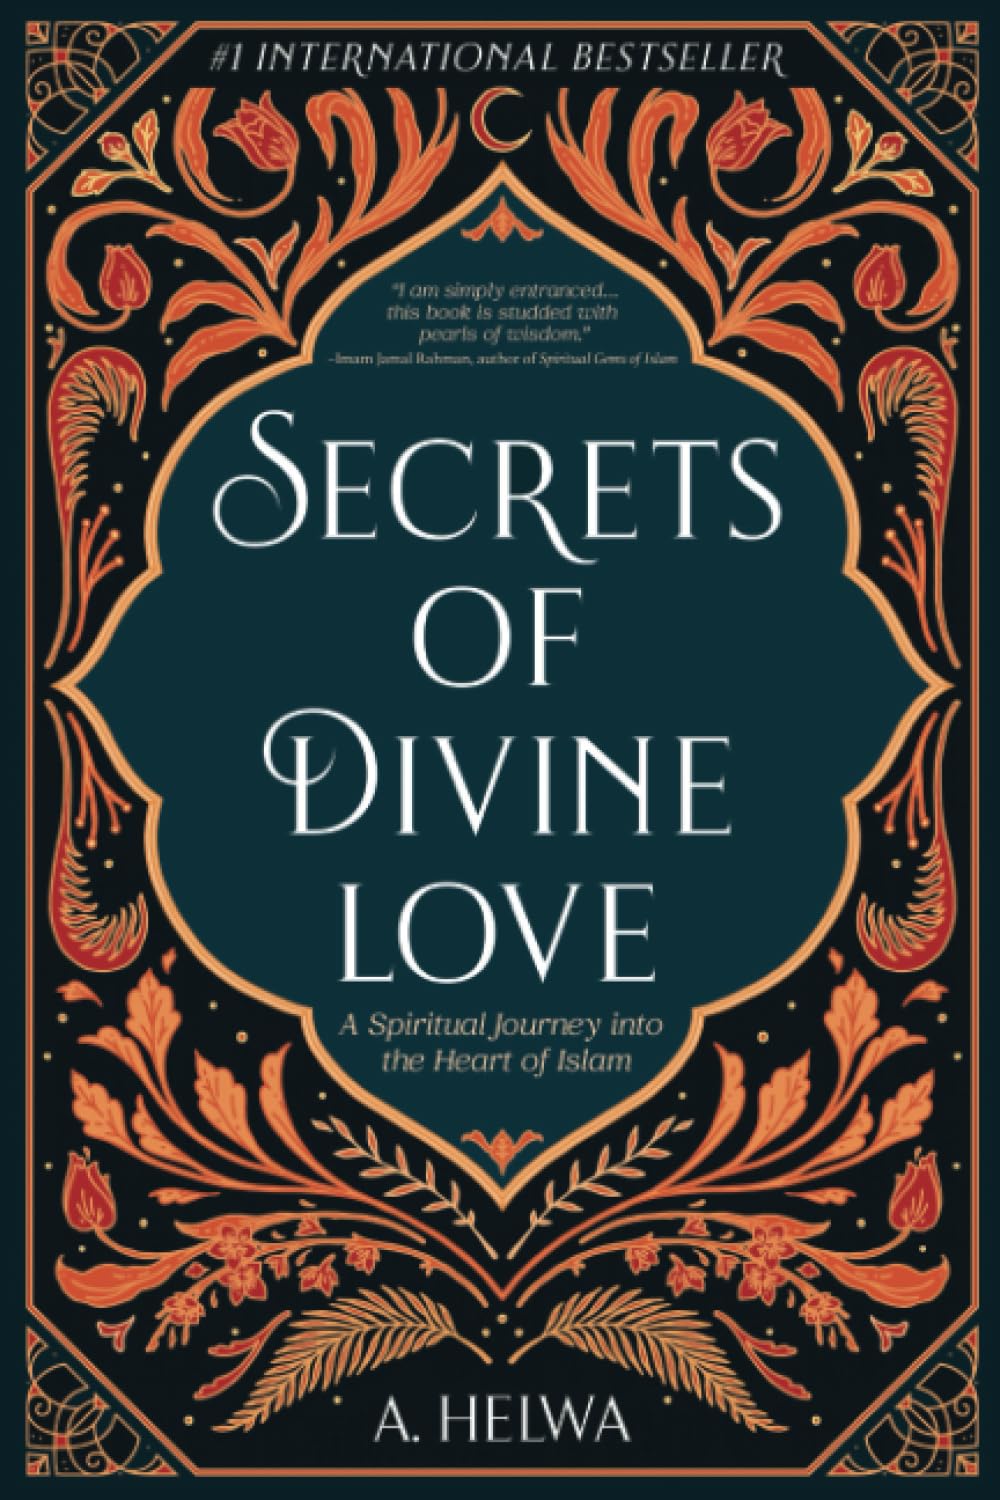 Secrets of Divine Love: A Spiritual Jour: A Spiritual Journey into the Heart of Islam by M A.Helwa (Author) - alifthebookstore